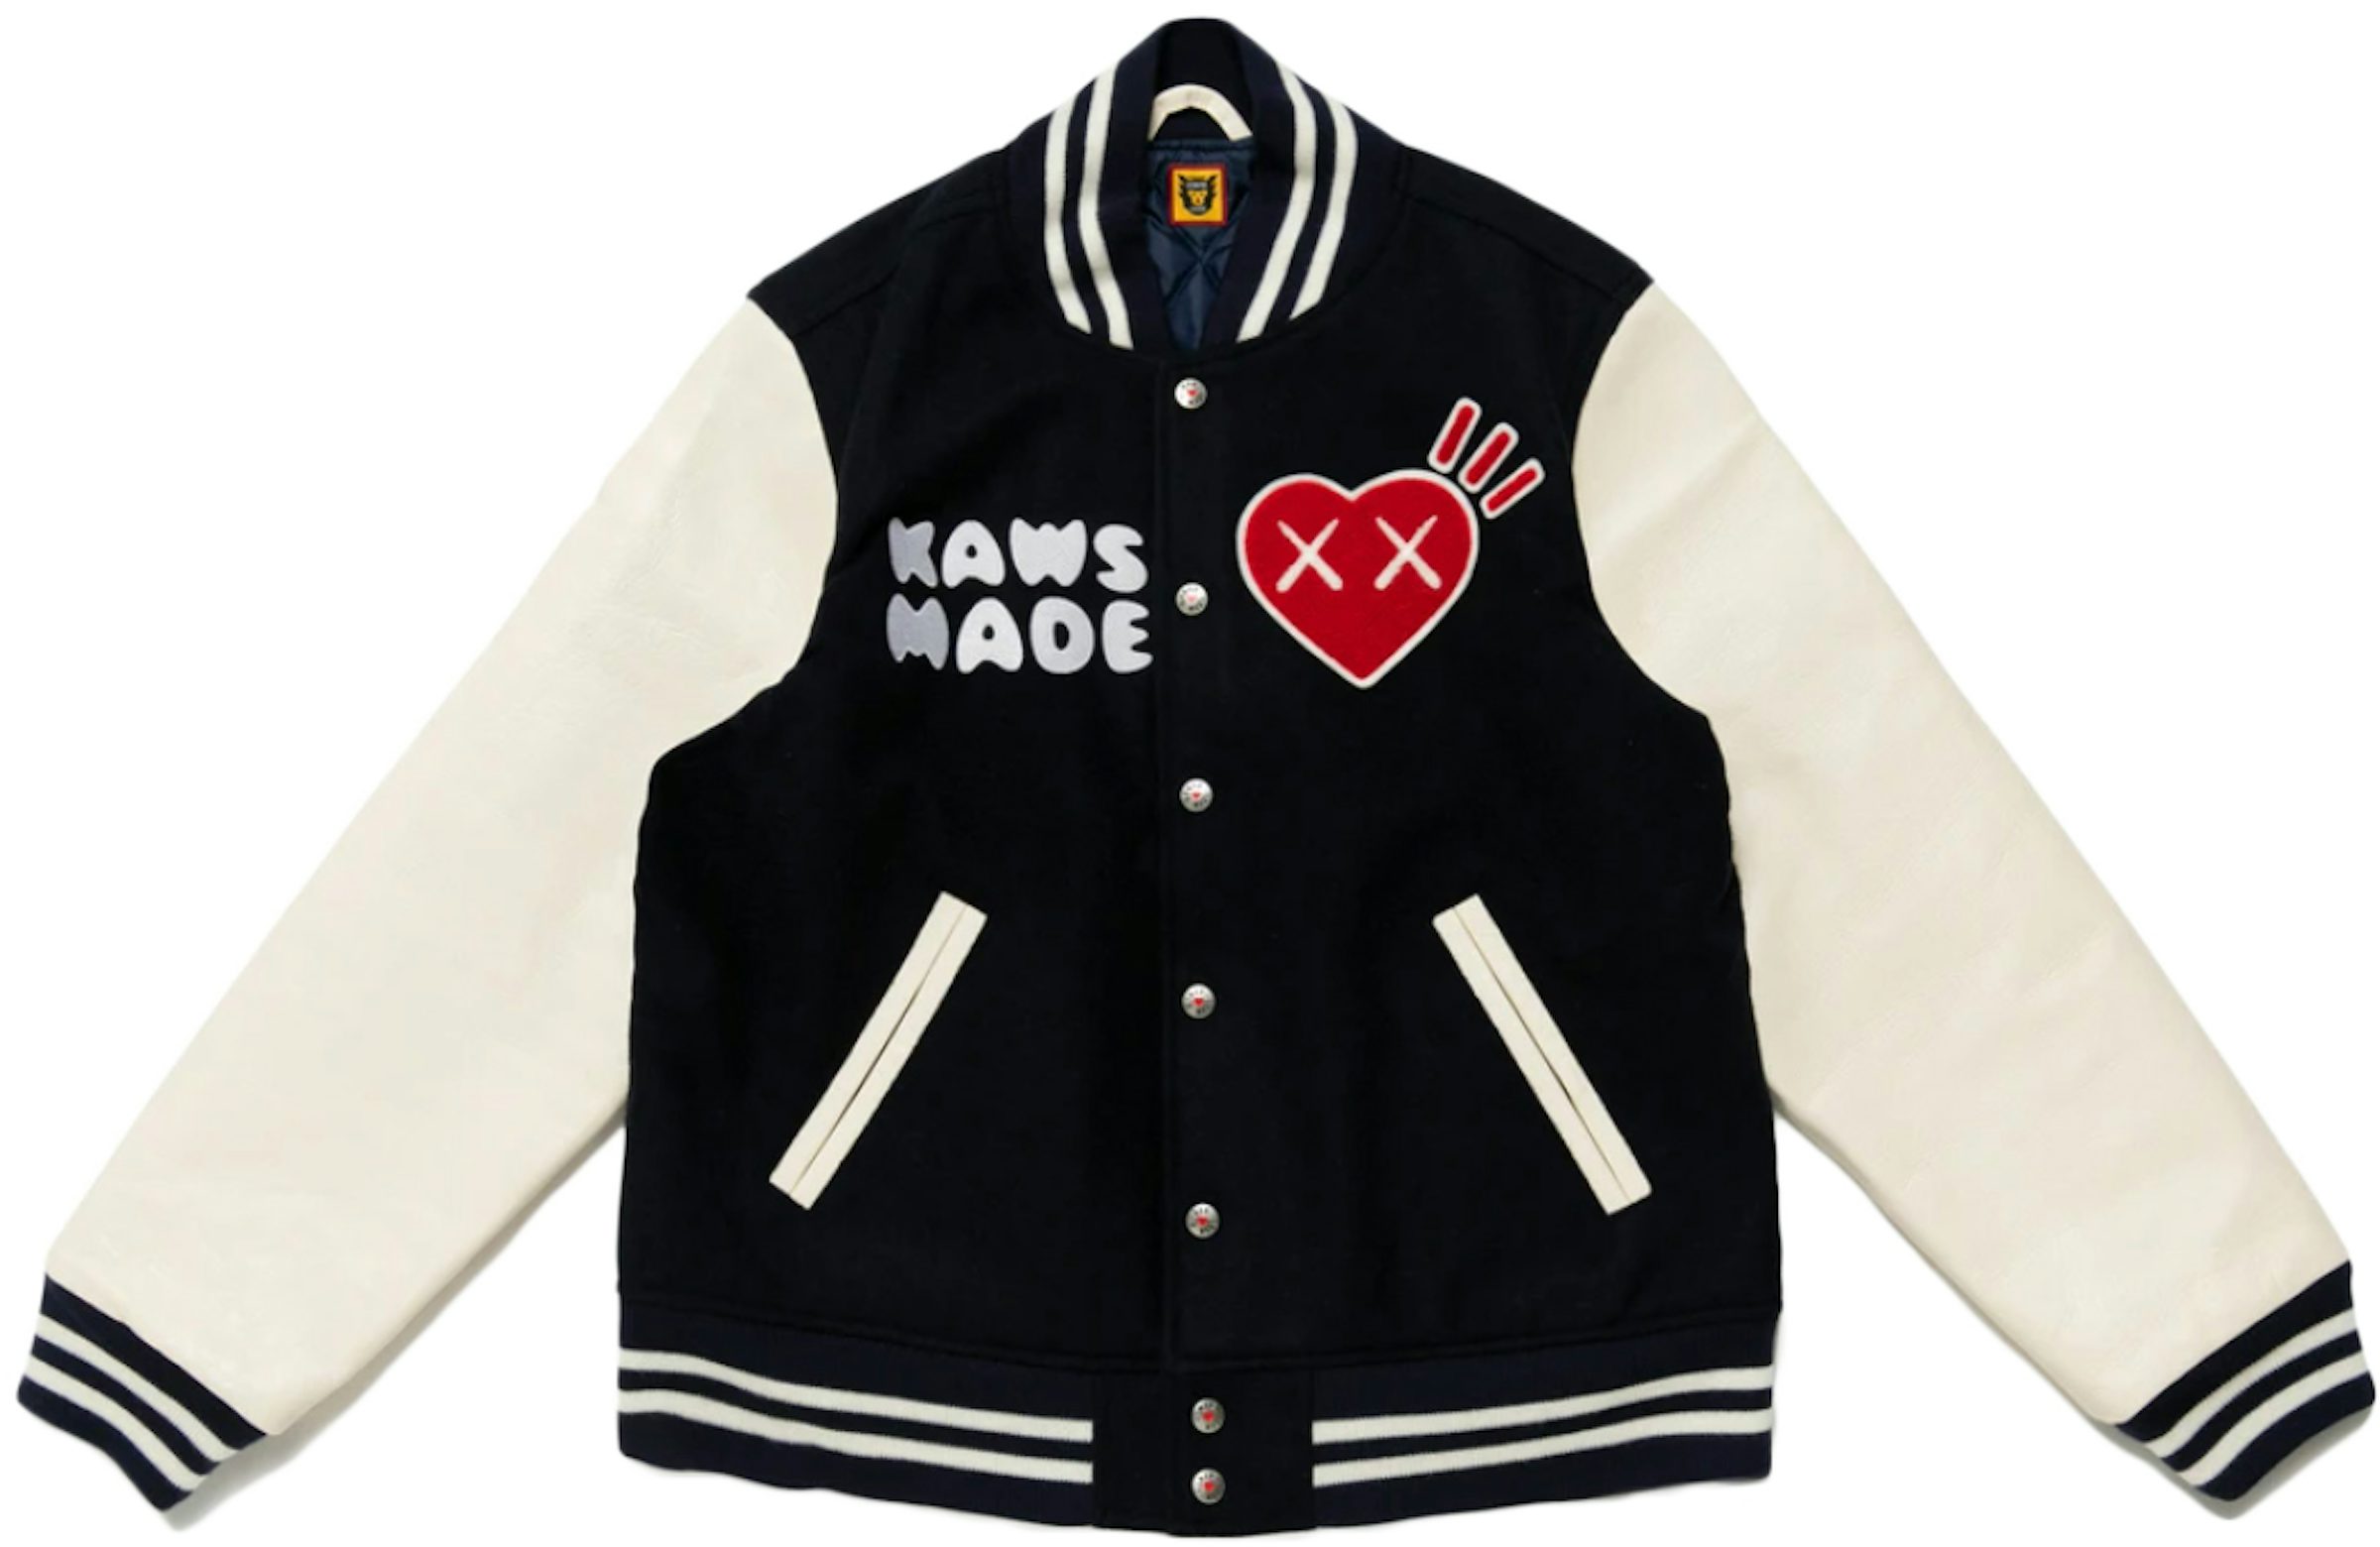 Puppet Baseball Jacket - Luxury Outerwear and Coats - Ready to